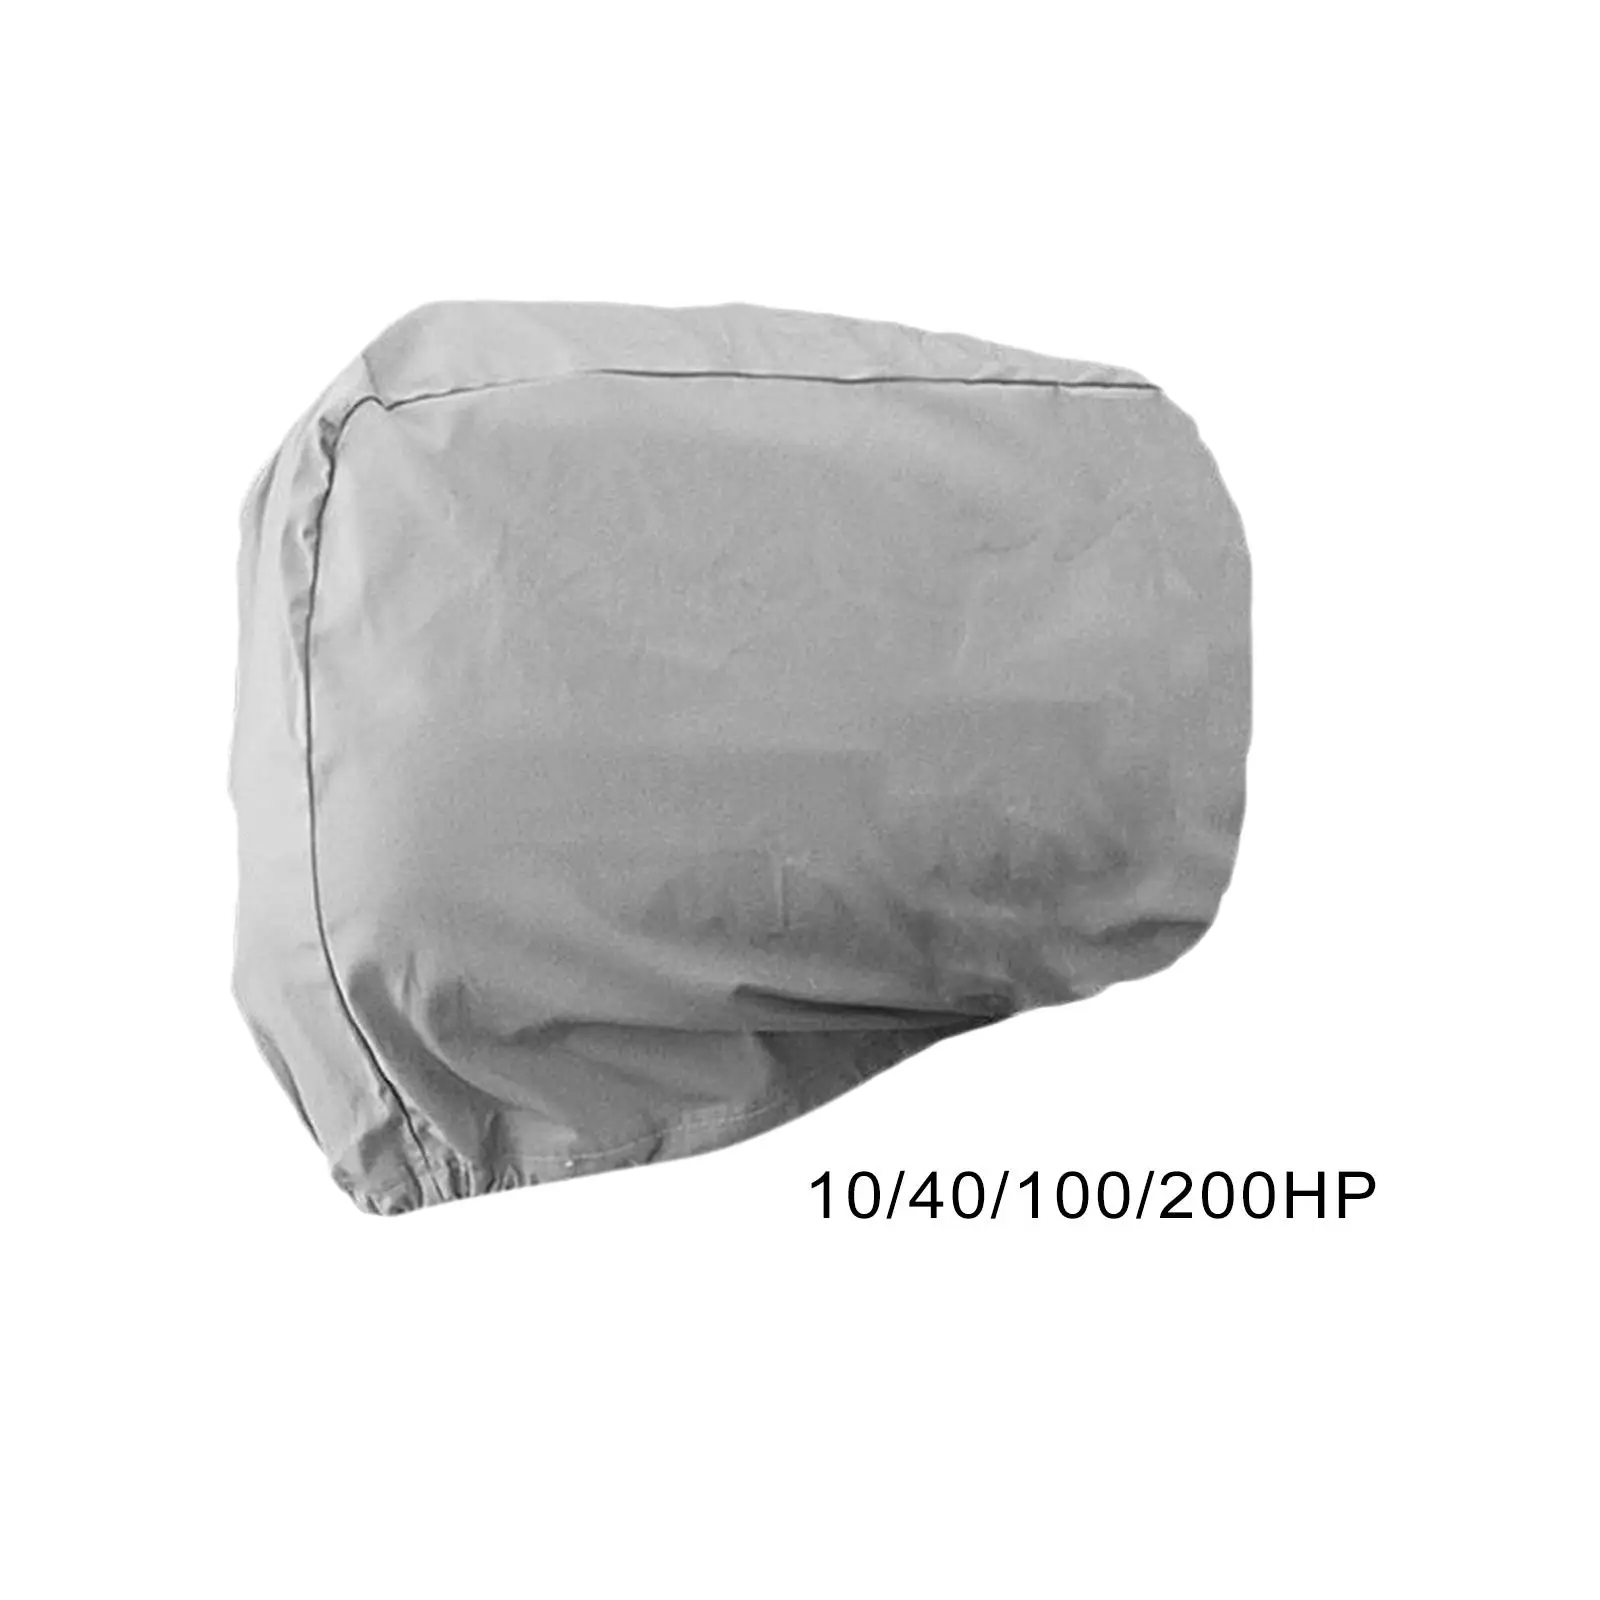 Boat Hood Covers Portable Dust Proof Heavy Duty Waterproof Engine Protector Oxford Outboard Motor Cover for Boats Sea Navigation